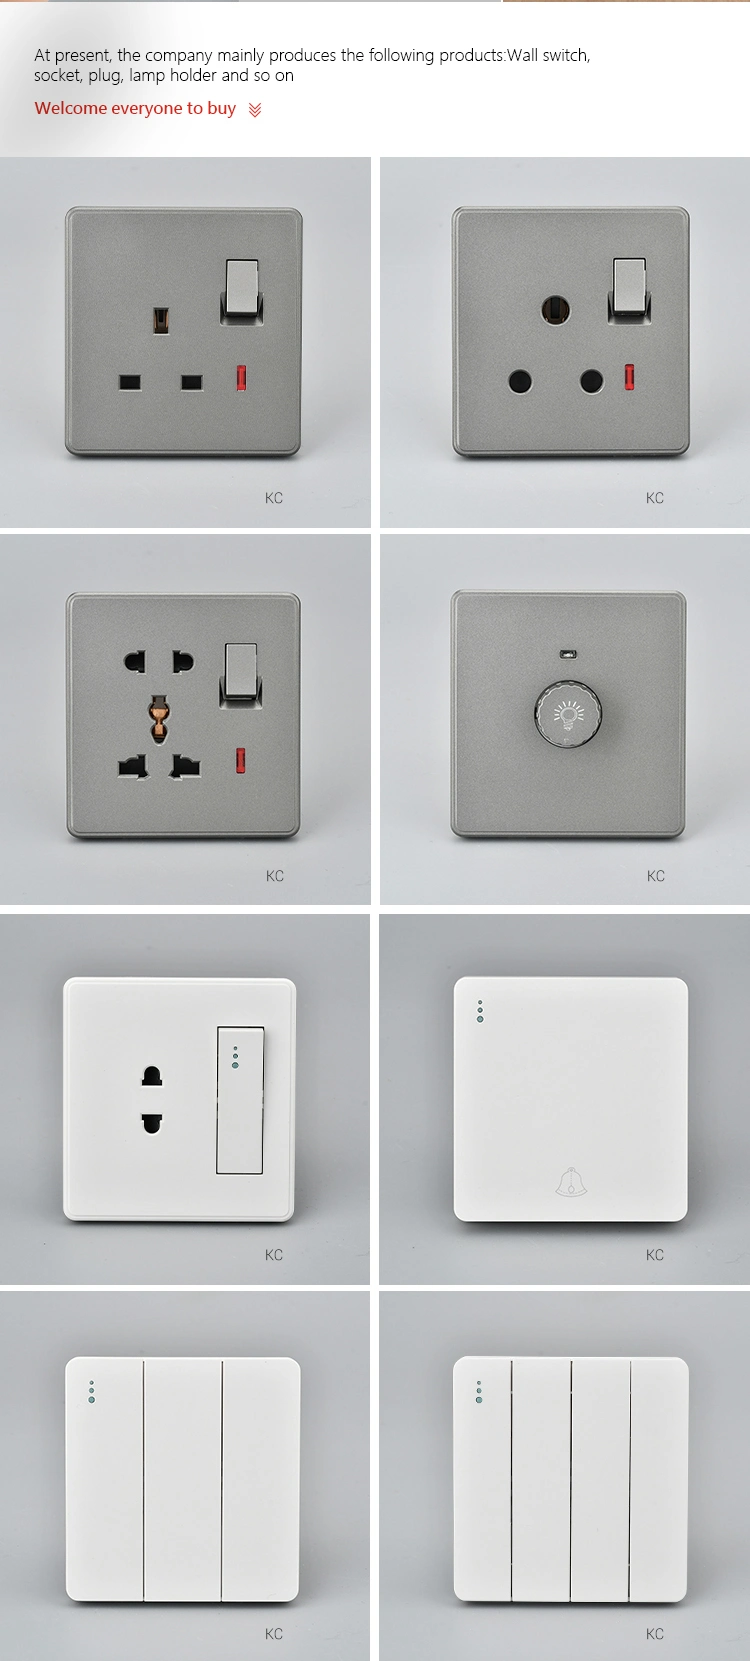 2023 New Disign UK Light 1 Gang 1 Way 10A Electrical Wall Switch and Socket